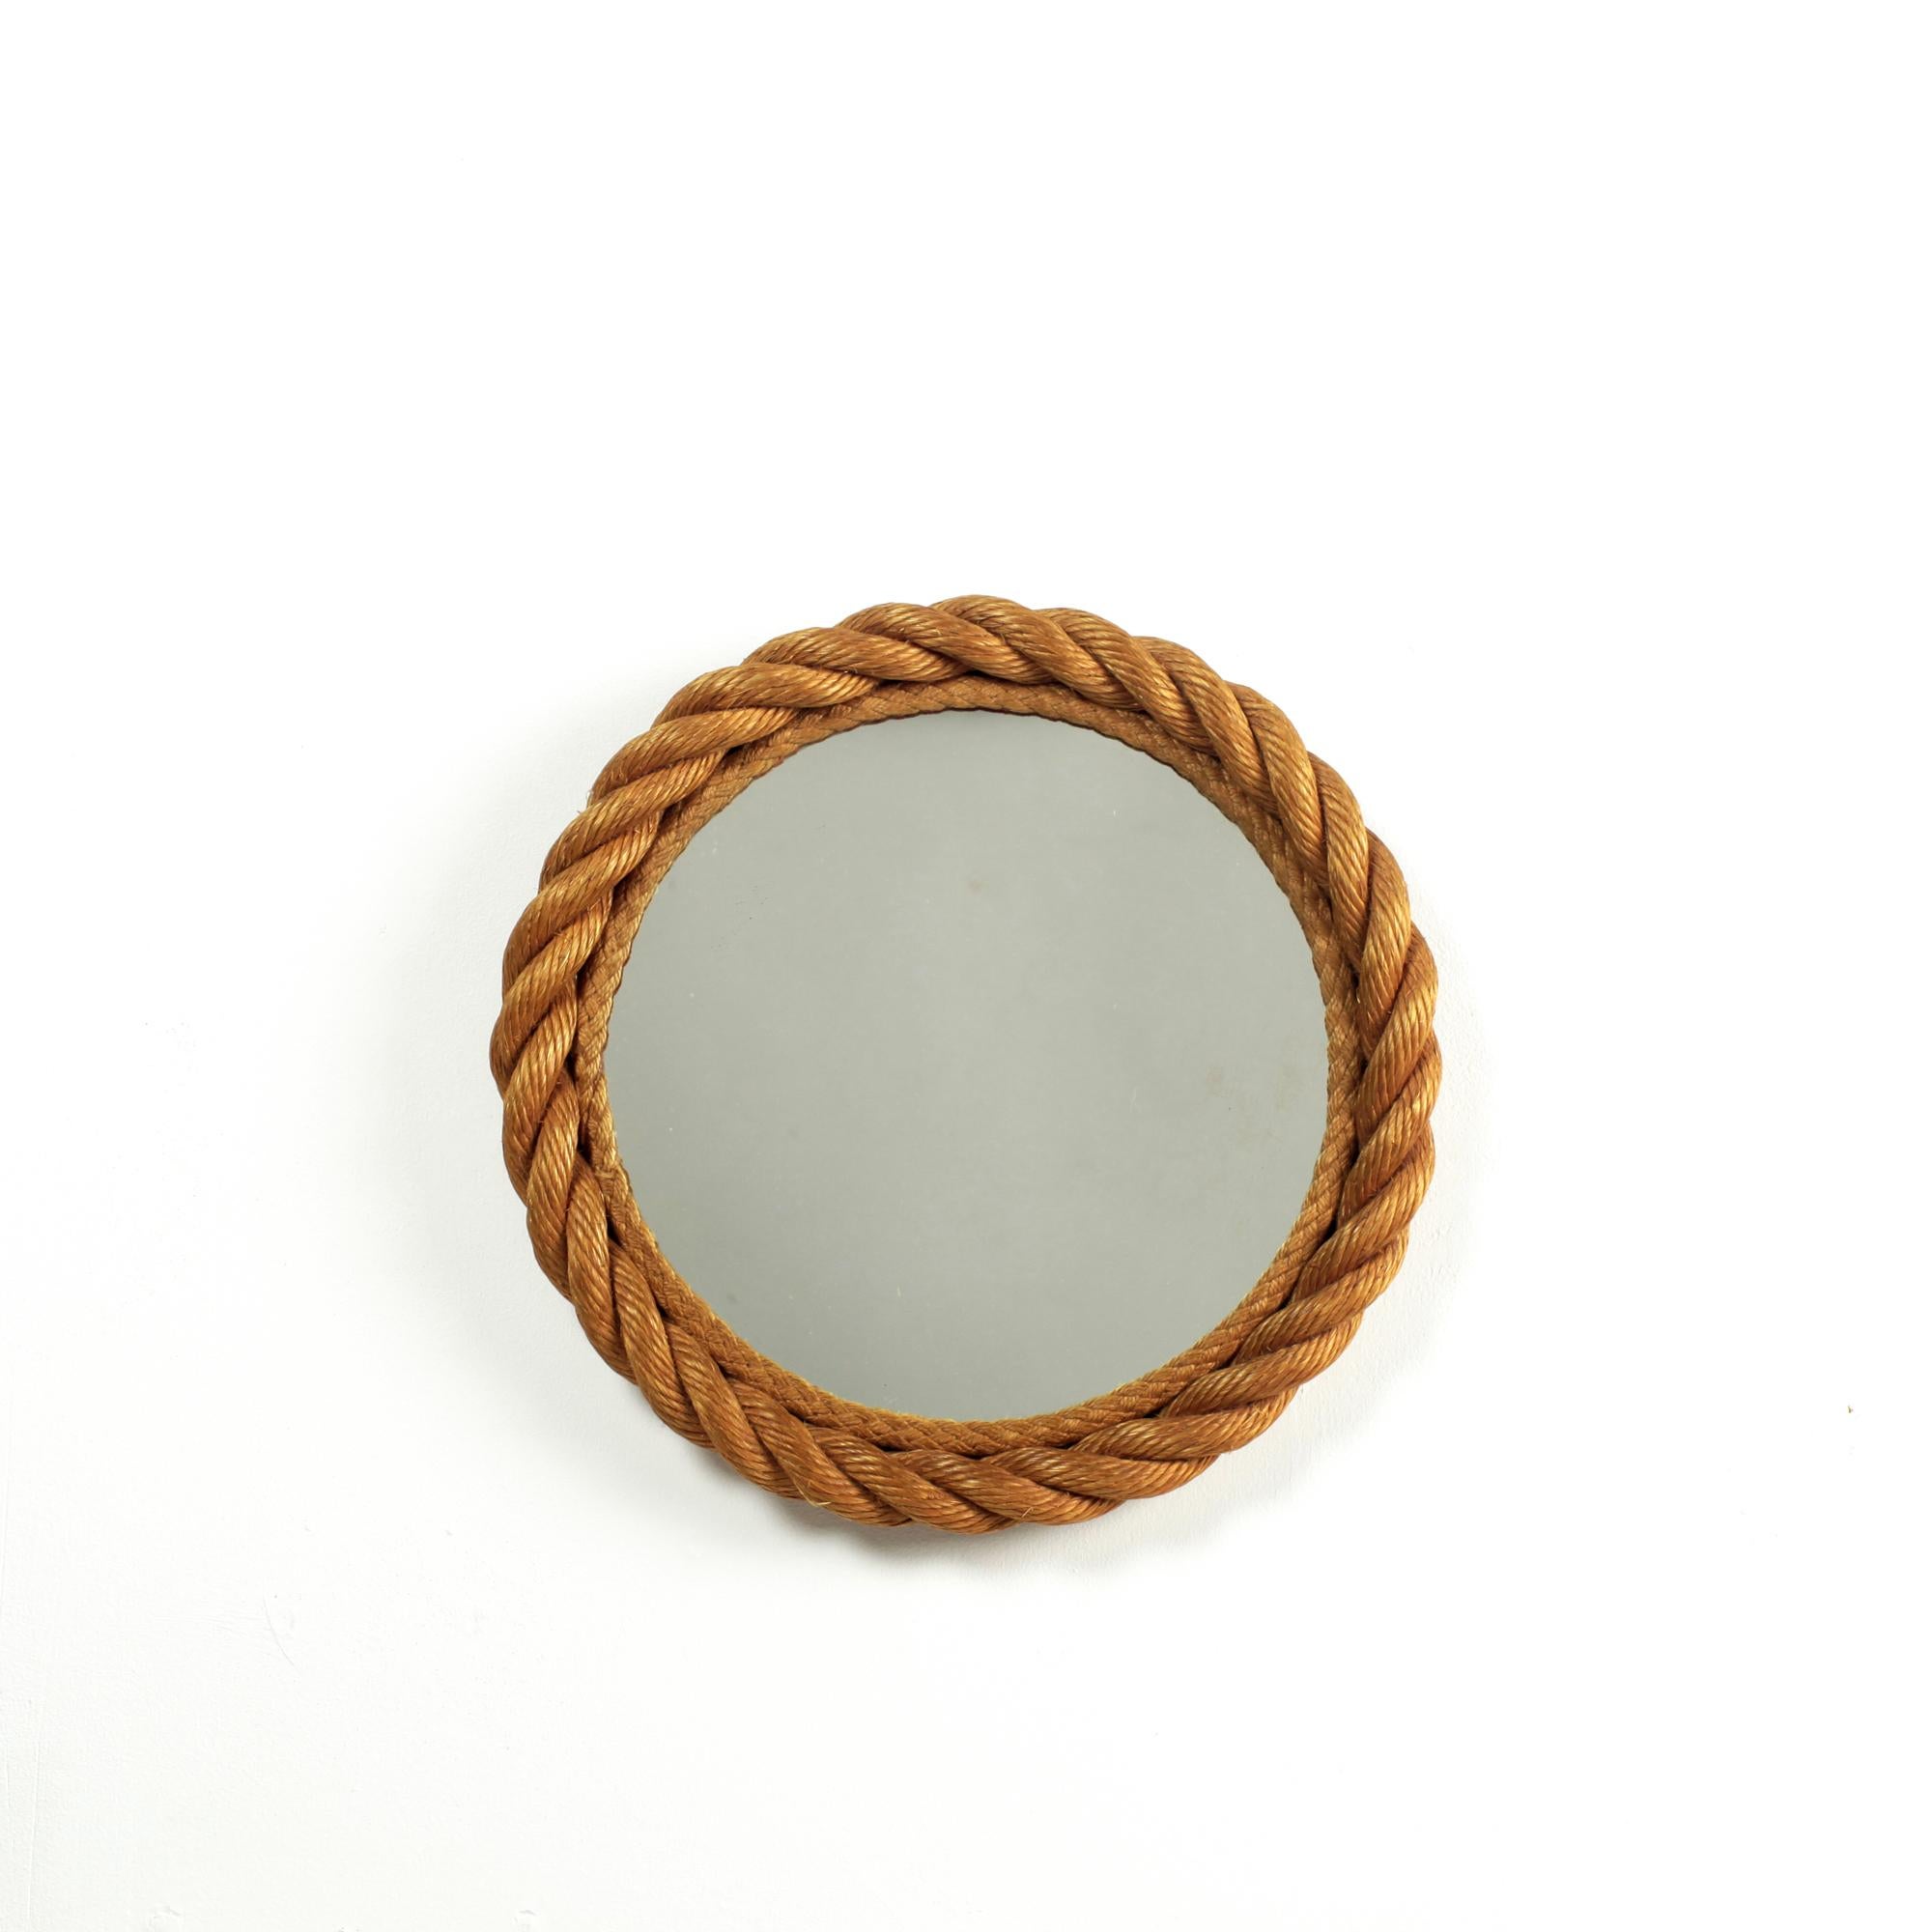 Audoux-Minet Midcentury Rope Wall Mirror France 1960's For Sale 2